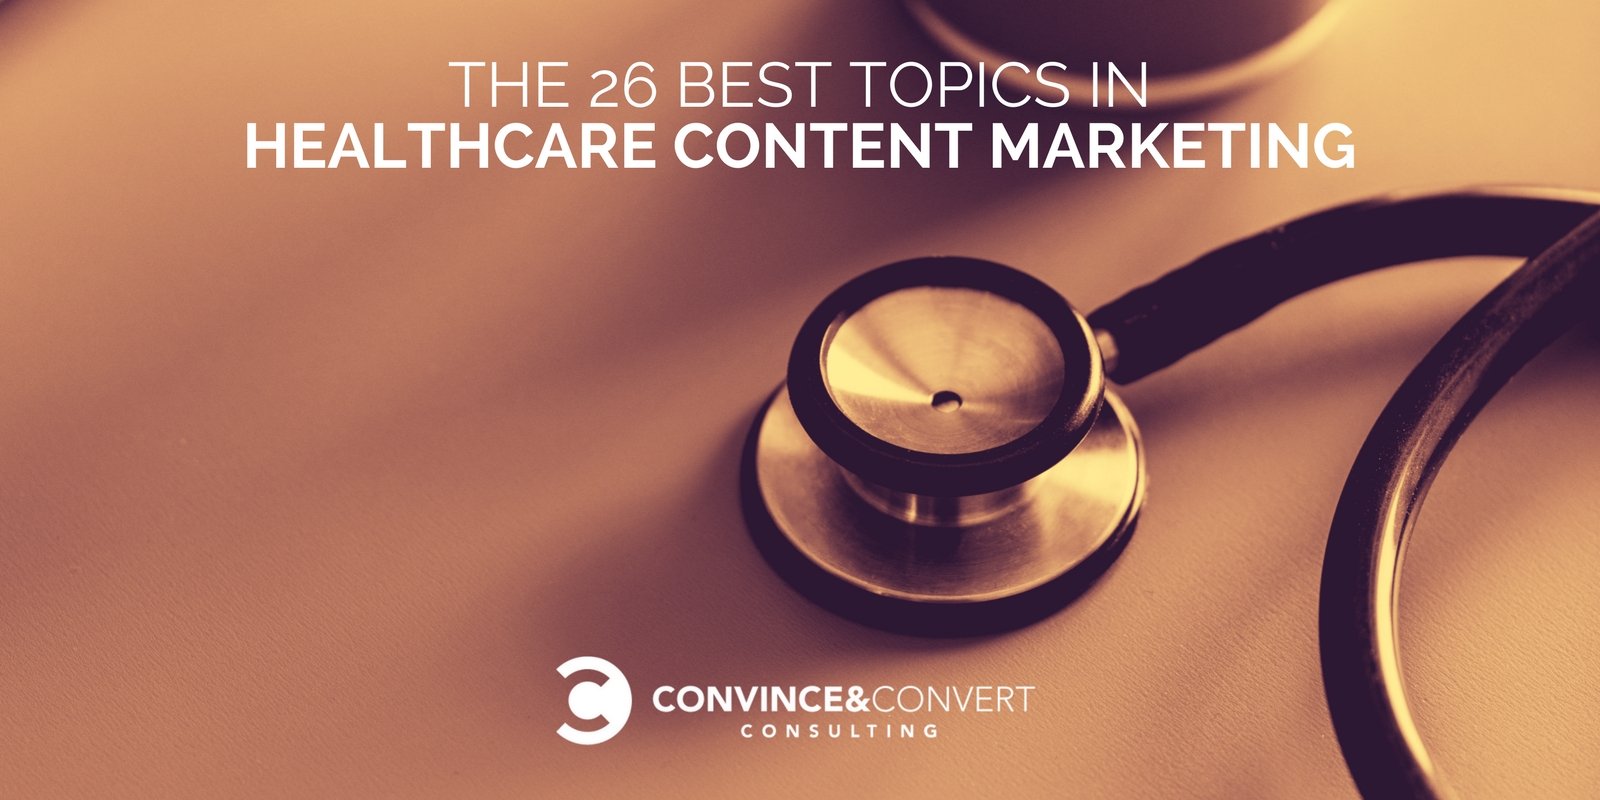 The 26 Best Topics in Healthcare Content Marketing